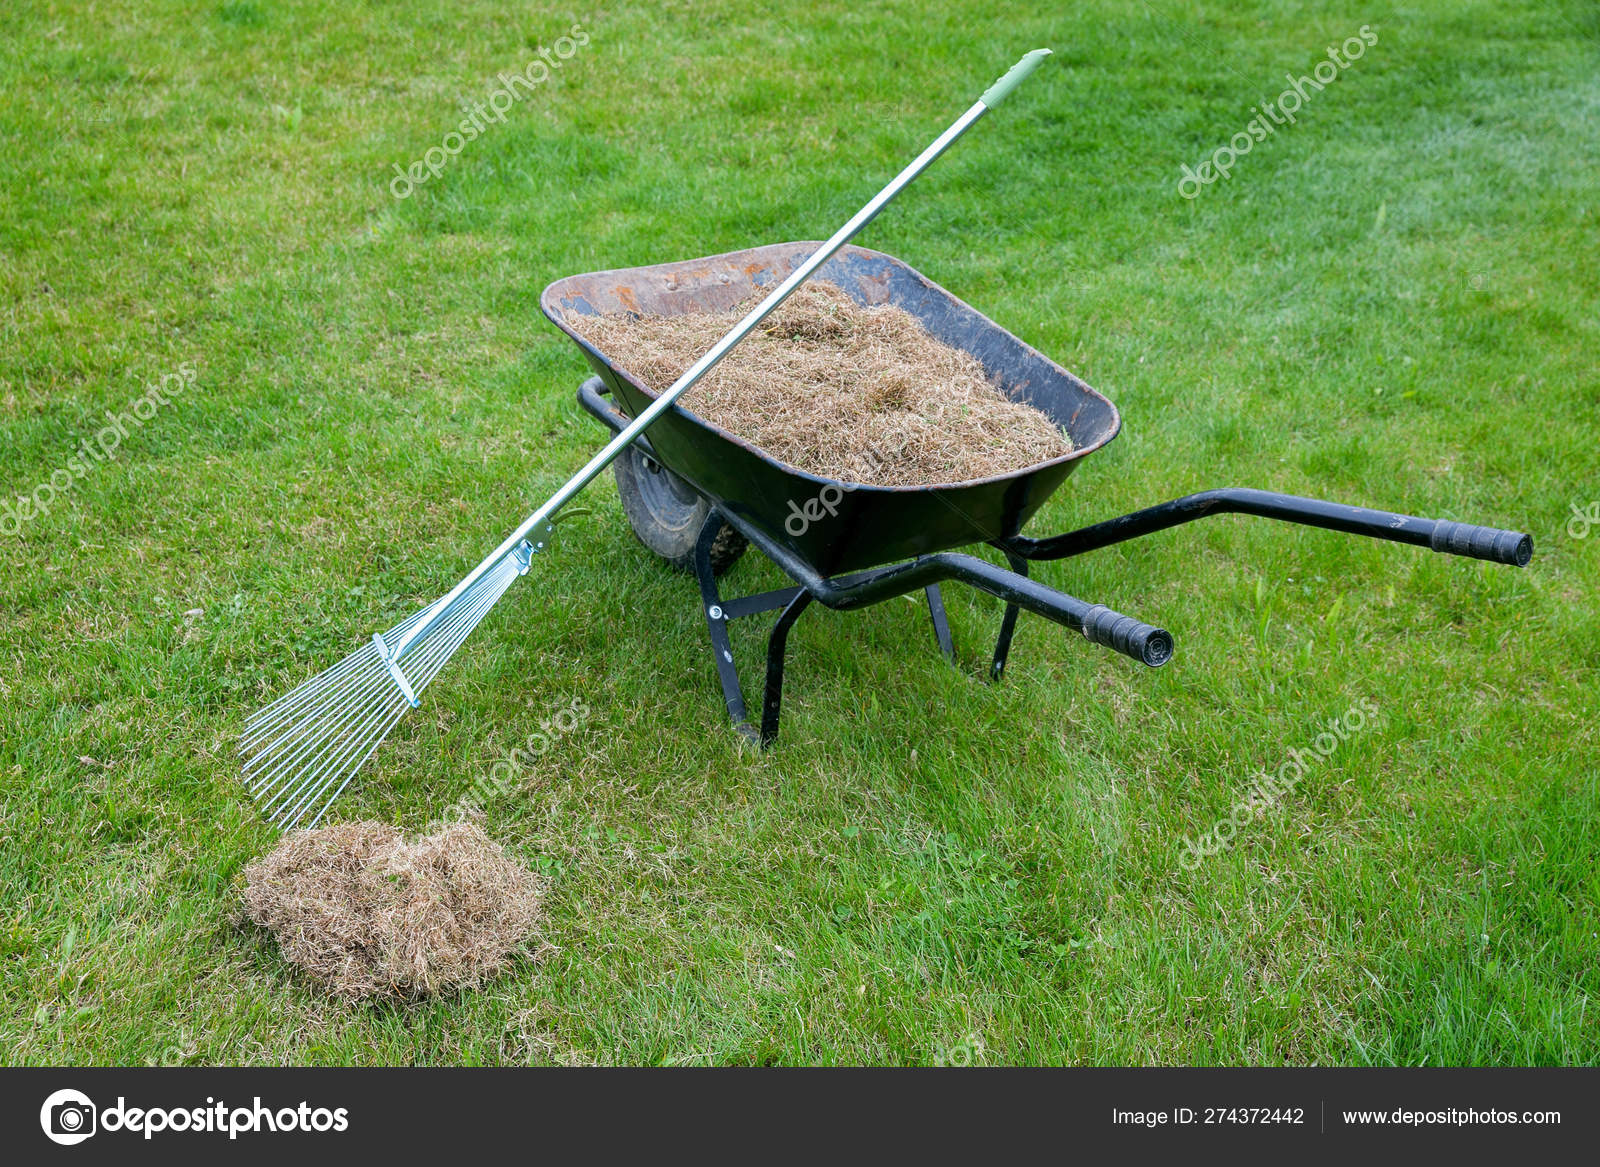 22 Lawn Dethatching Stock Photos Free Royalty Free Lawn Dethatching Images Depositphotos